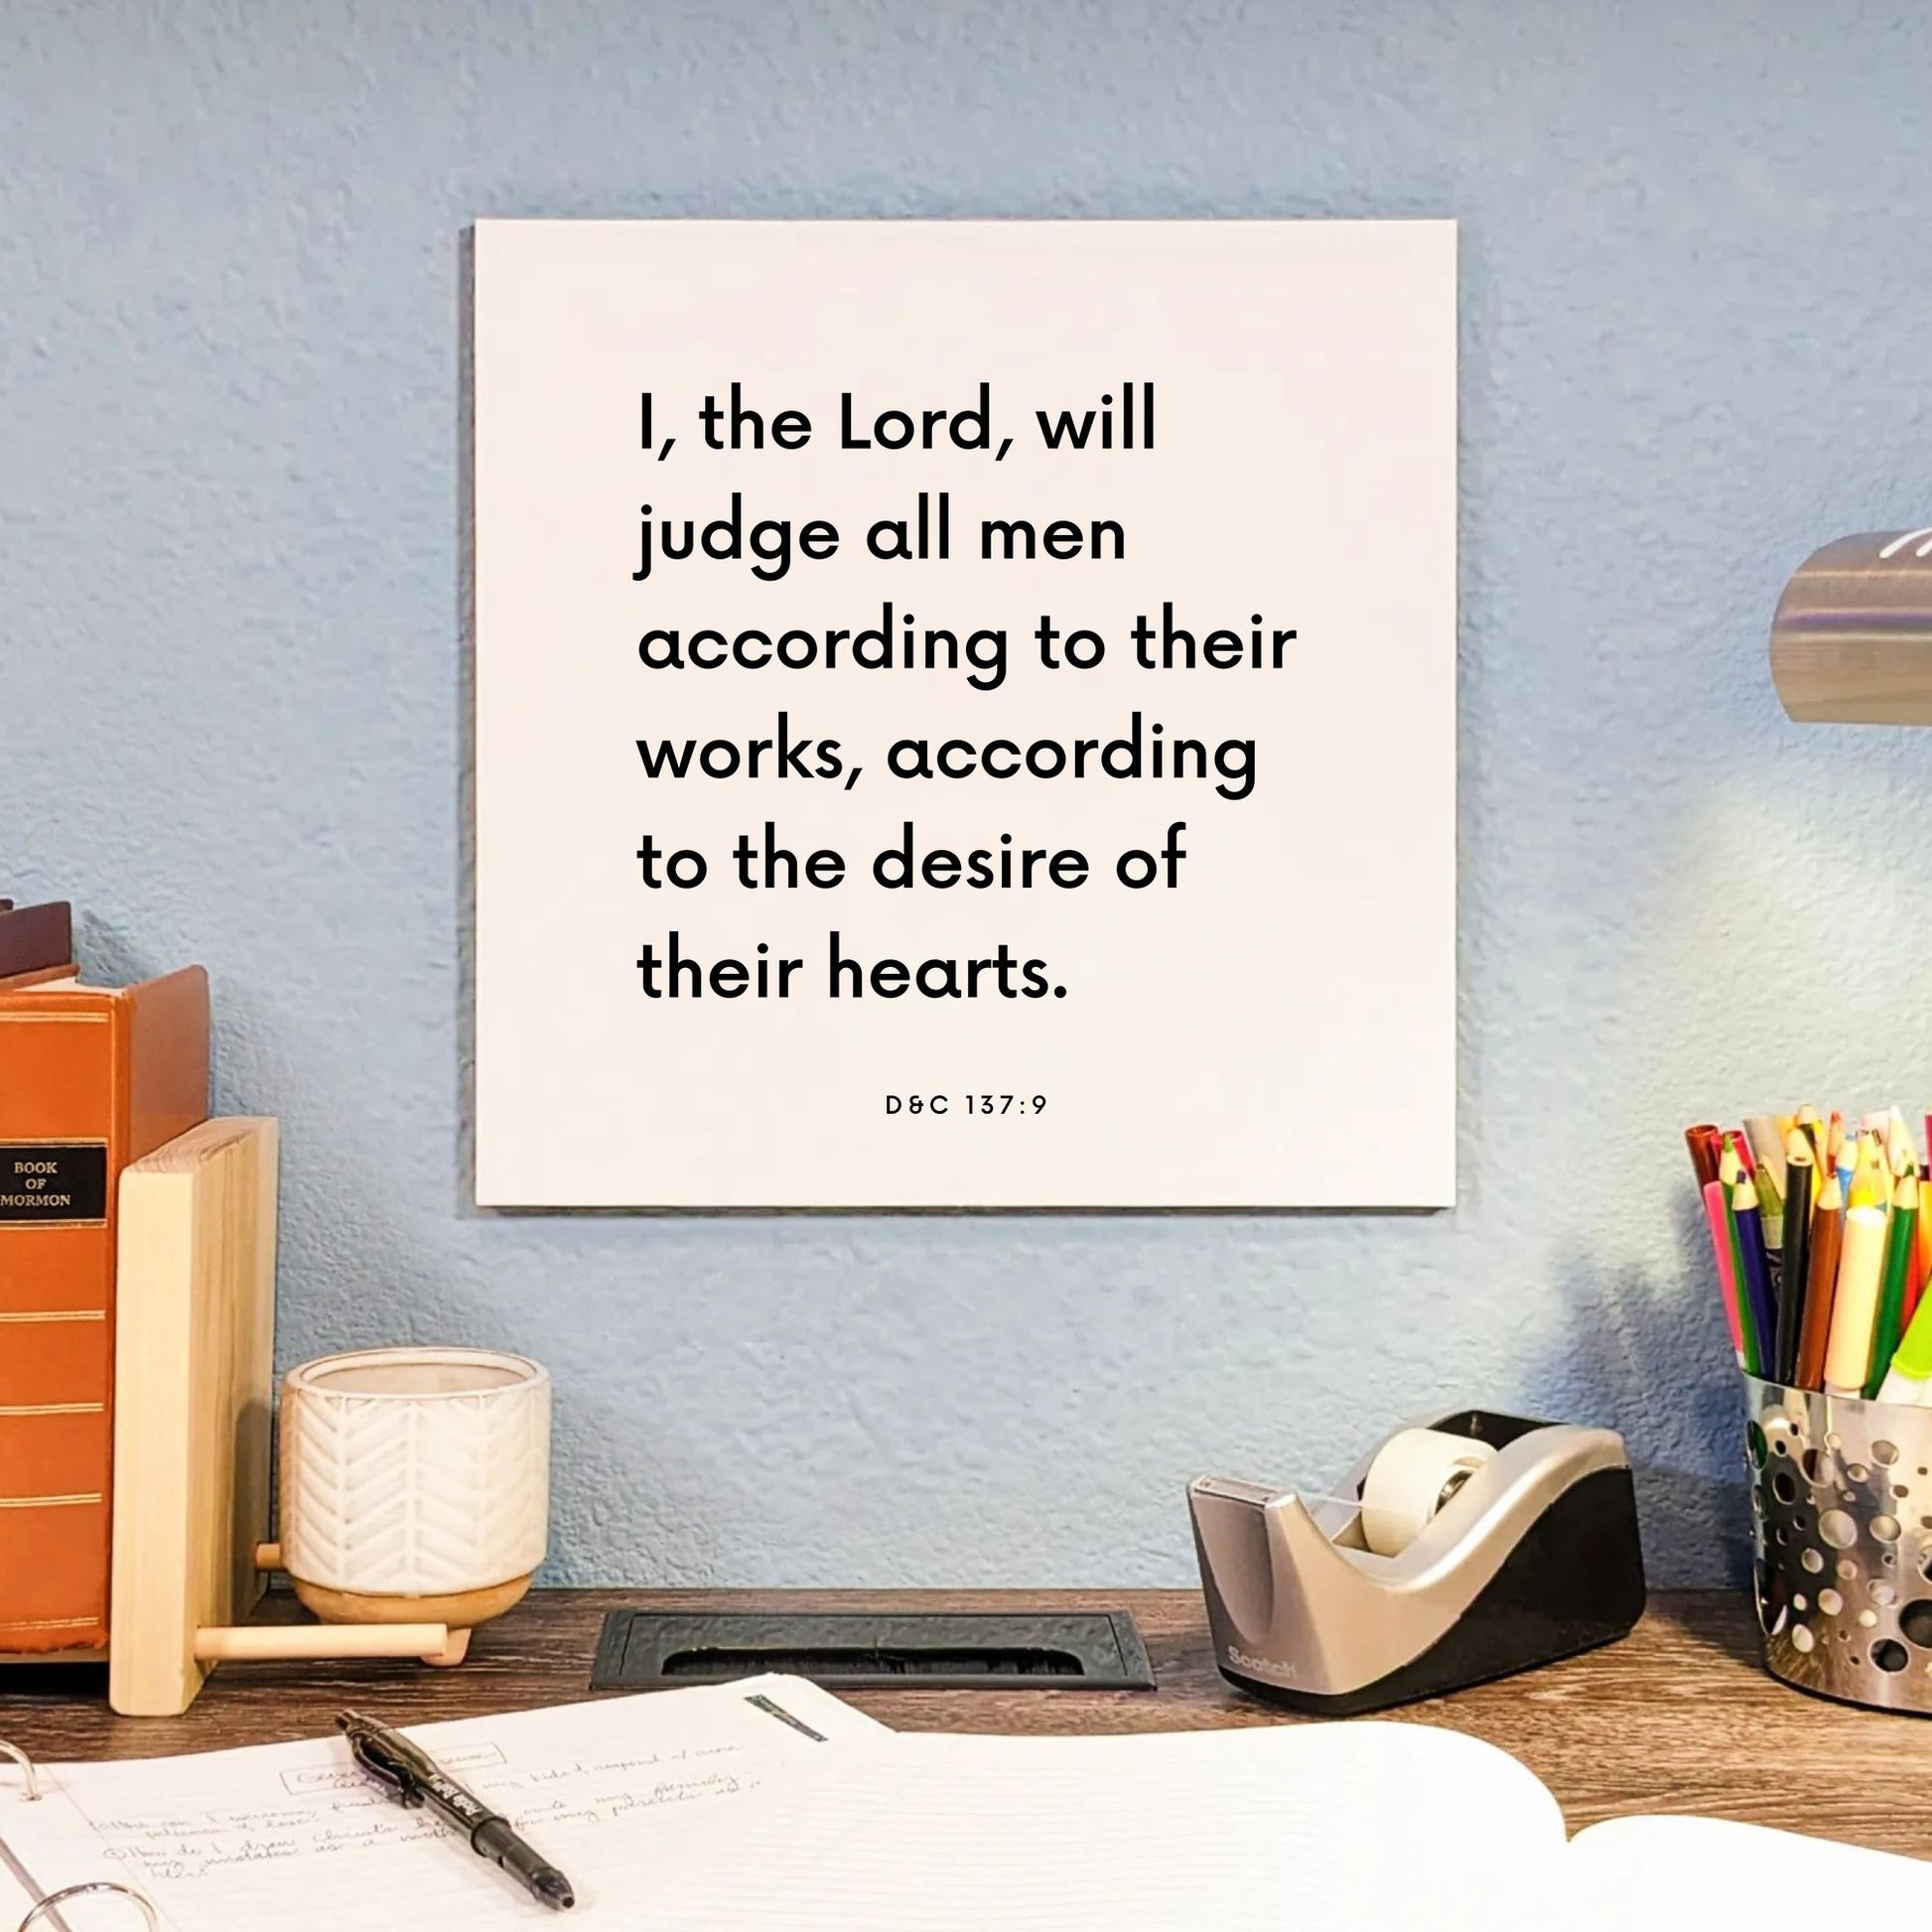 Desk mouting of the scripture tile for D&C 137:9 - "I, the Lord, will judge all men according to their works"